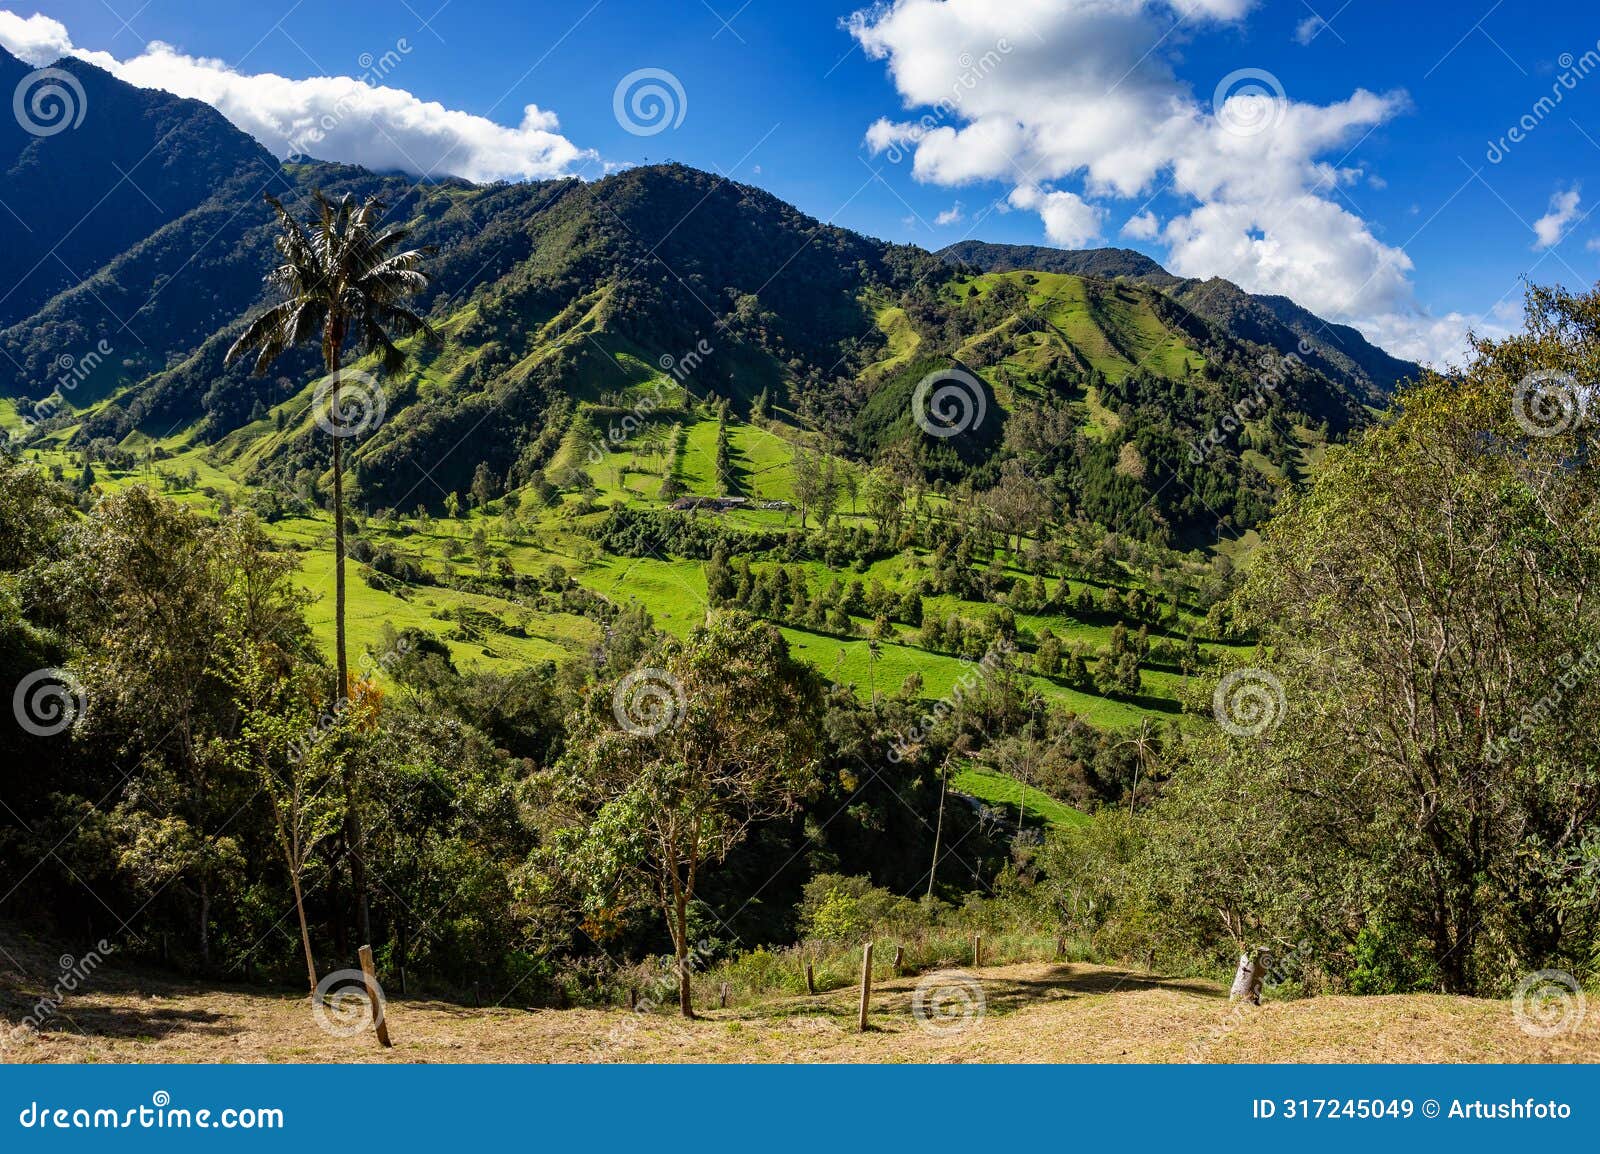 nature landscape of tall wax palm trees in valle del cocora valley. salento, quindio department. colombia mountains landscape.